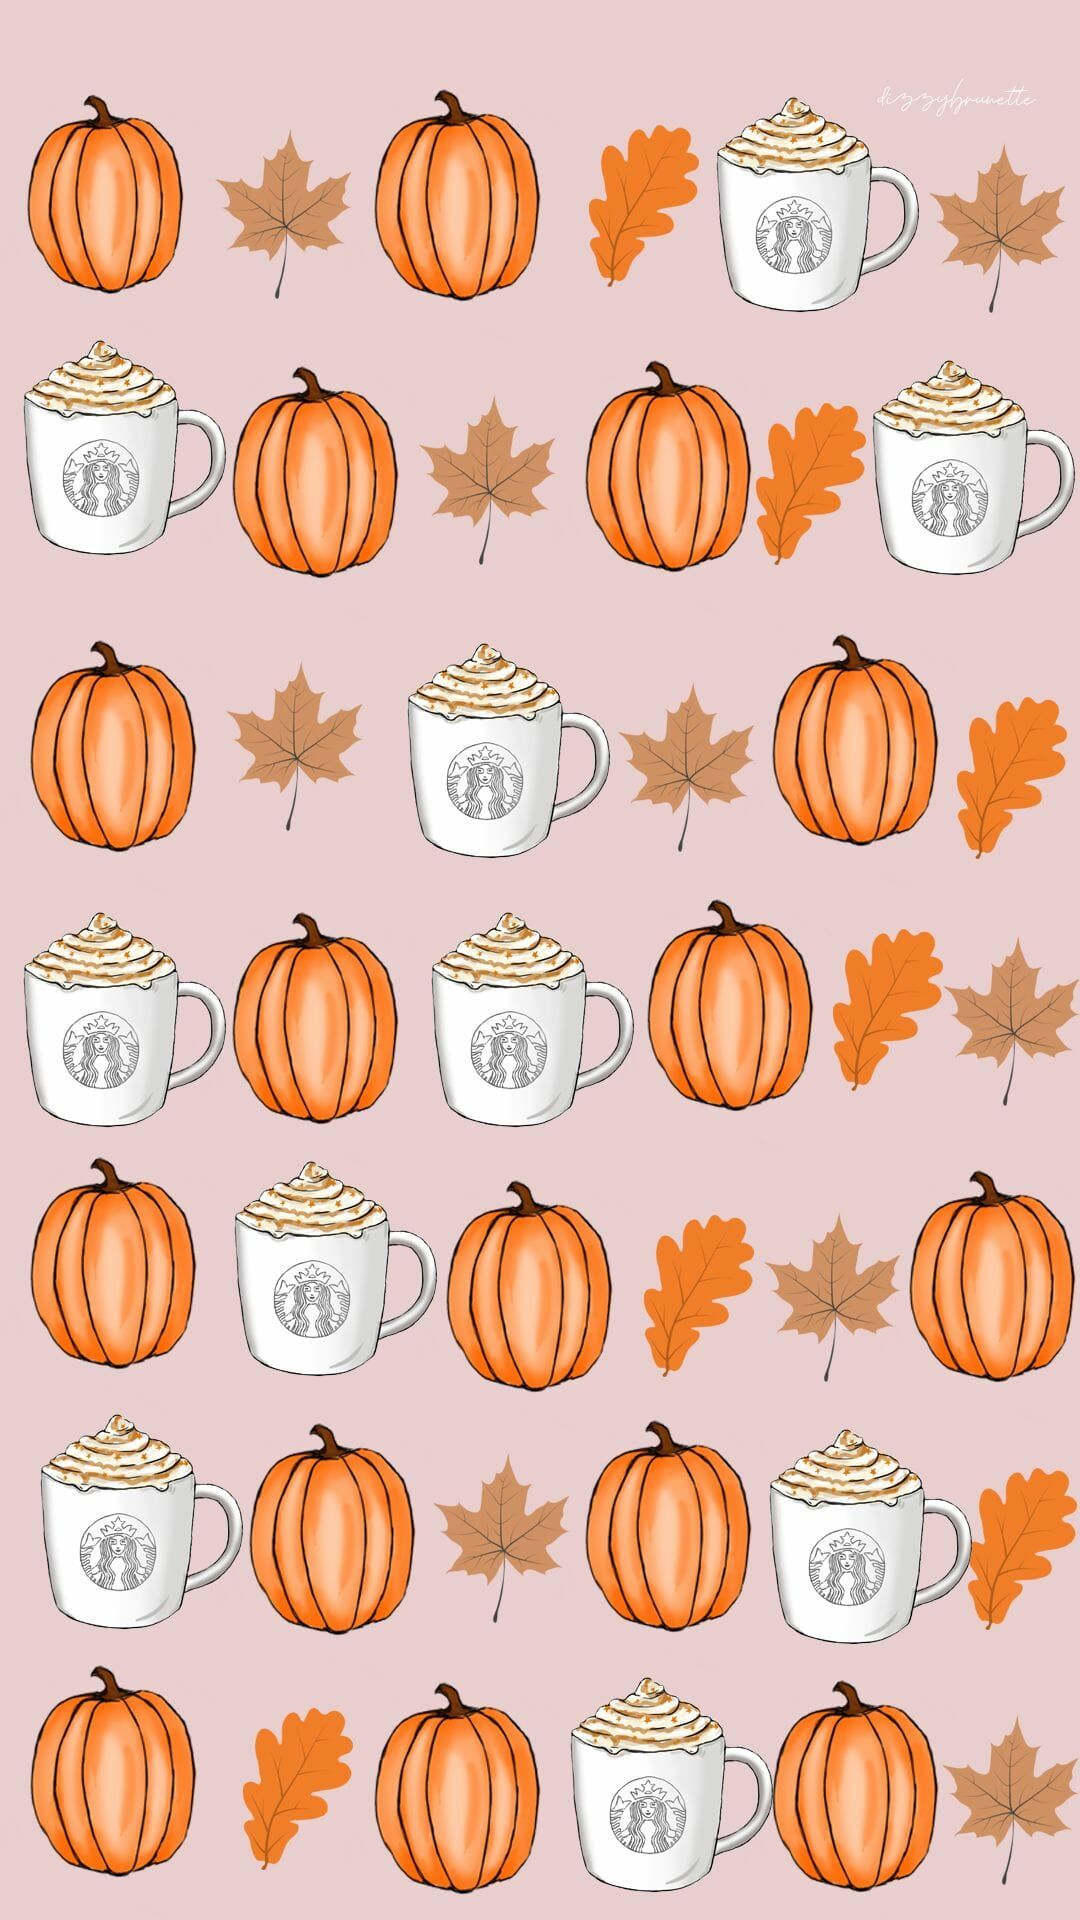 Cute Aesthetic Autumn Wallpapers Wallpapers